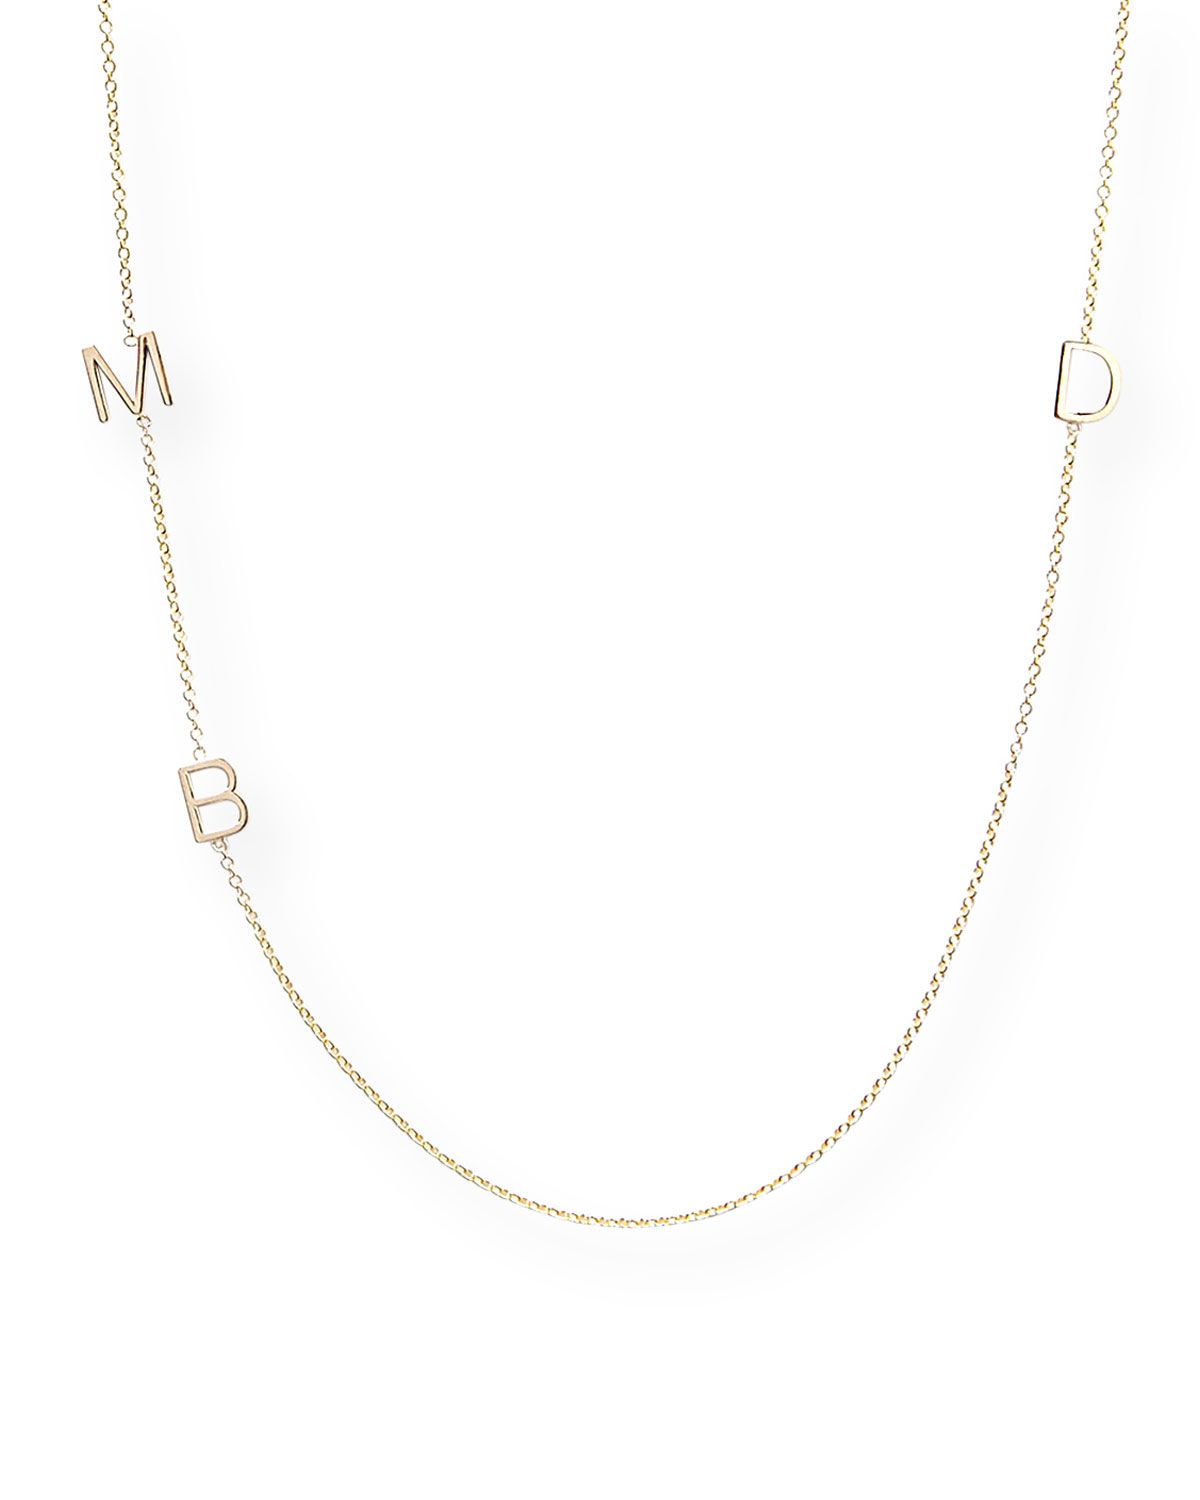 Mini 3-Letter Personalized Necklace, 14k Yellow Gold | Neiman Marcus